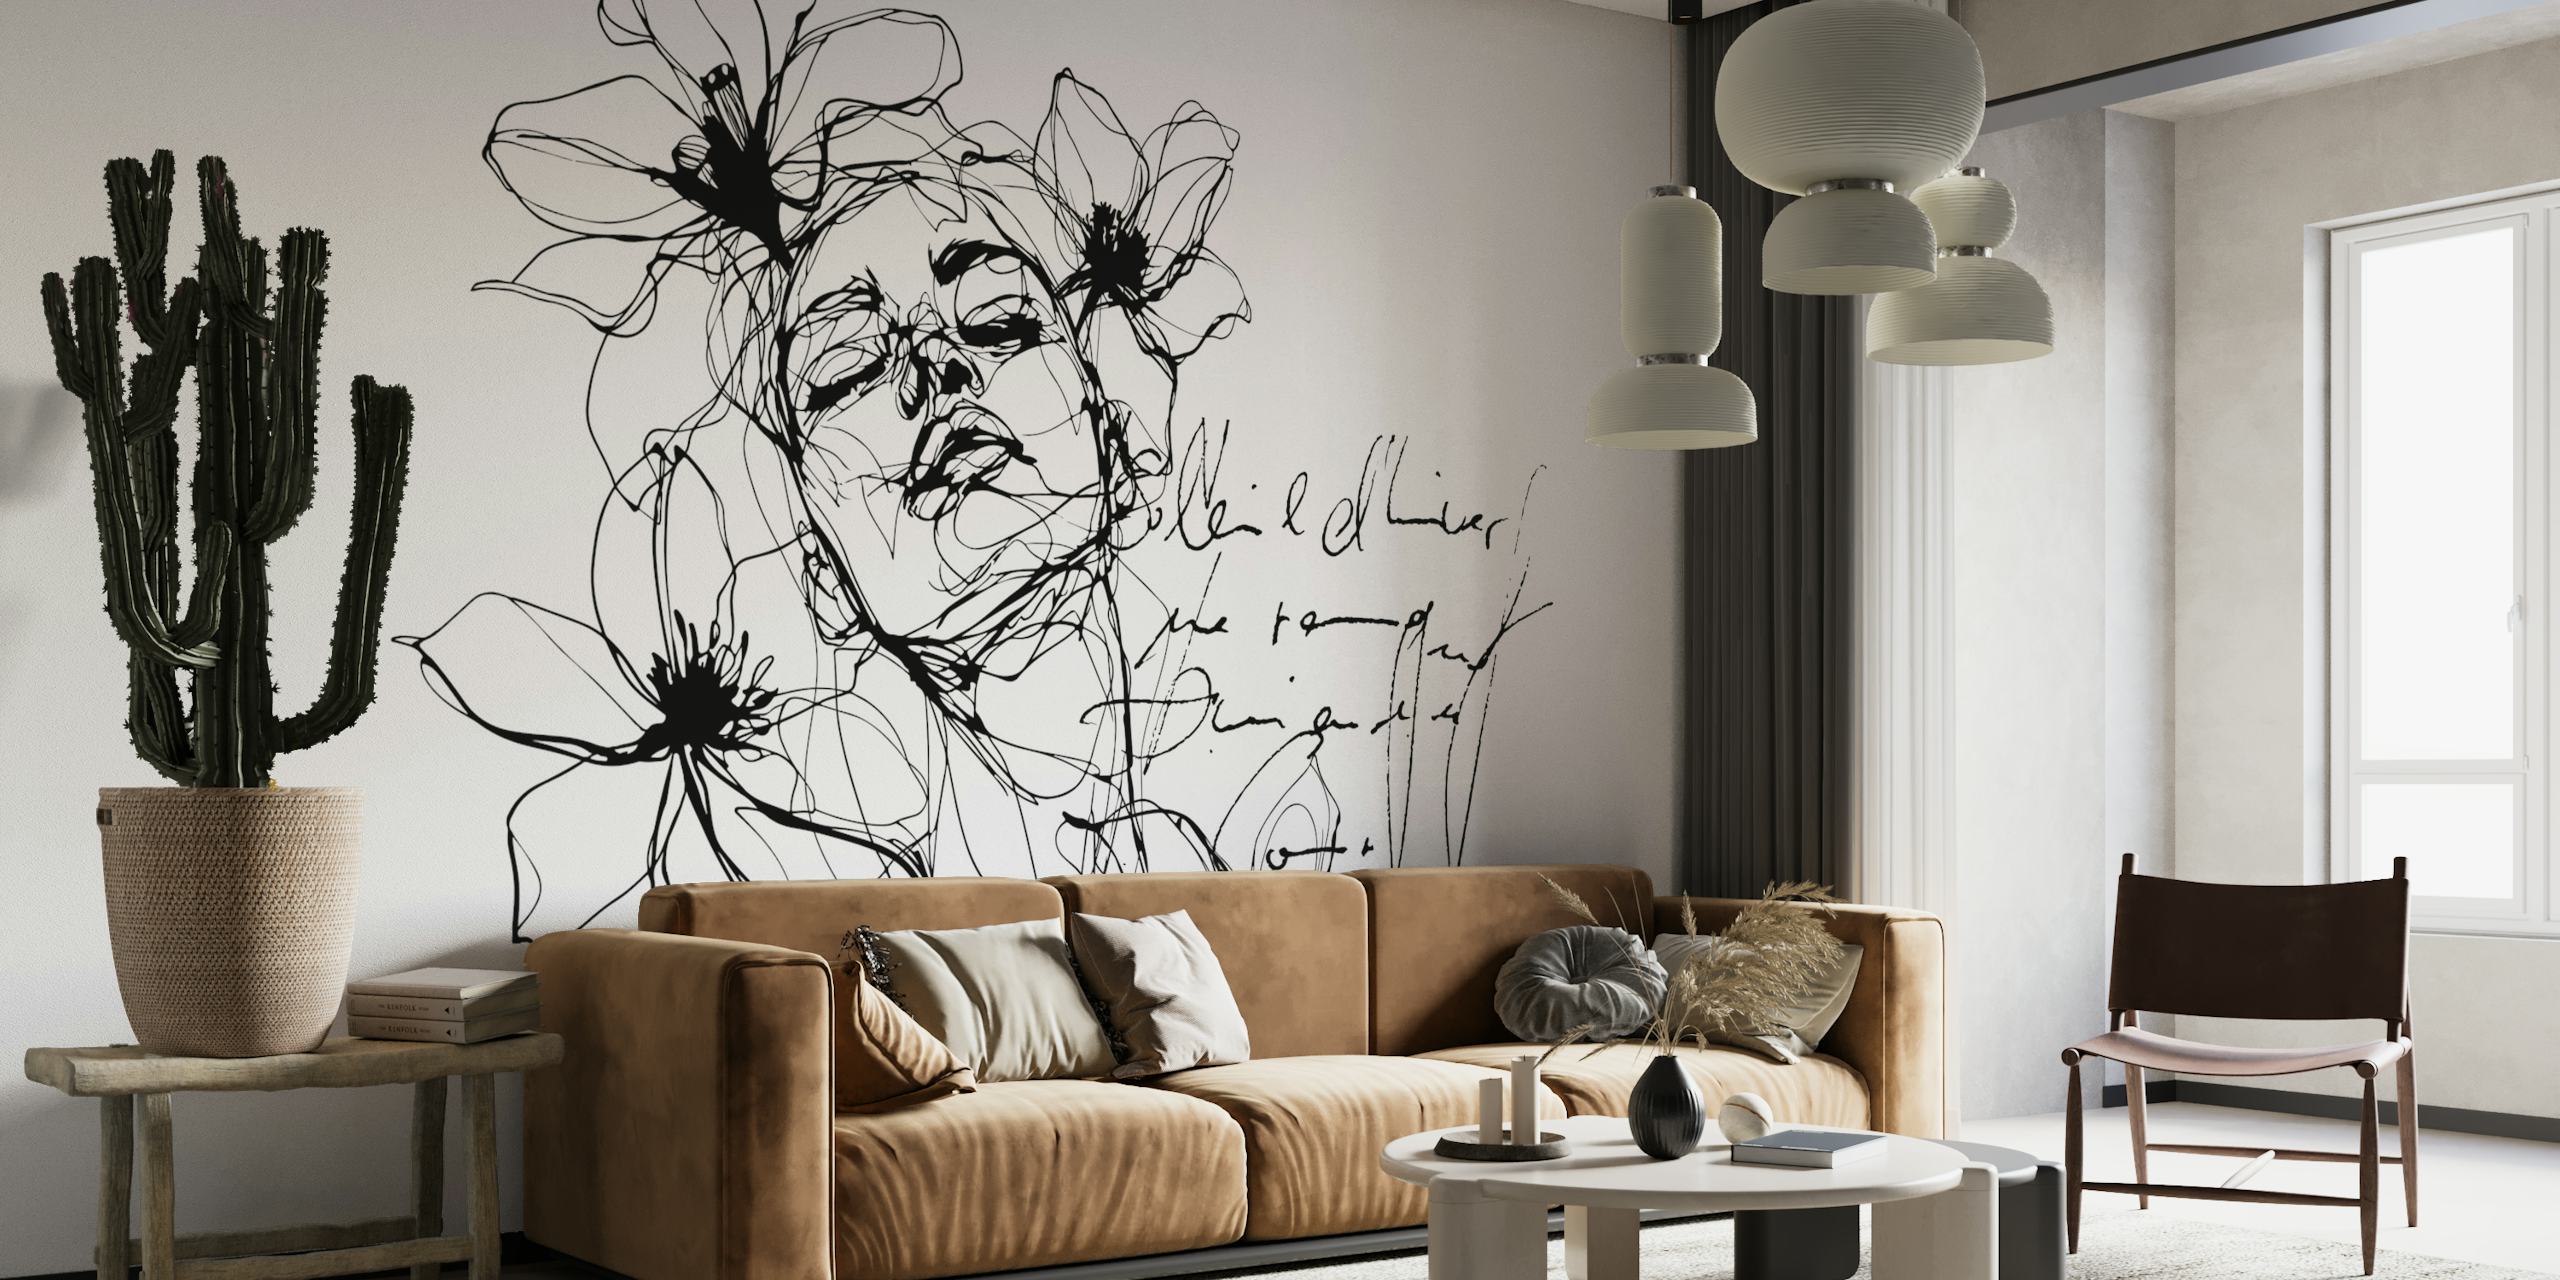 Minimalist line art wall mural of a female figure with floral accents in black and white